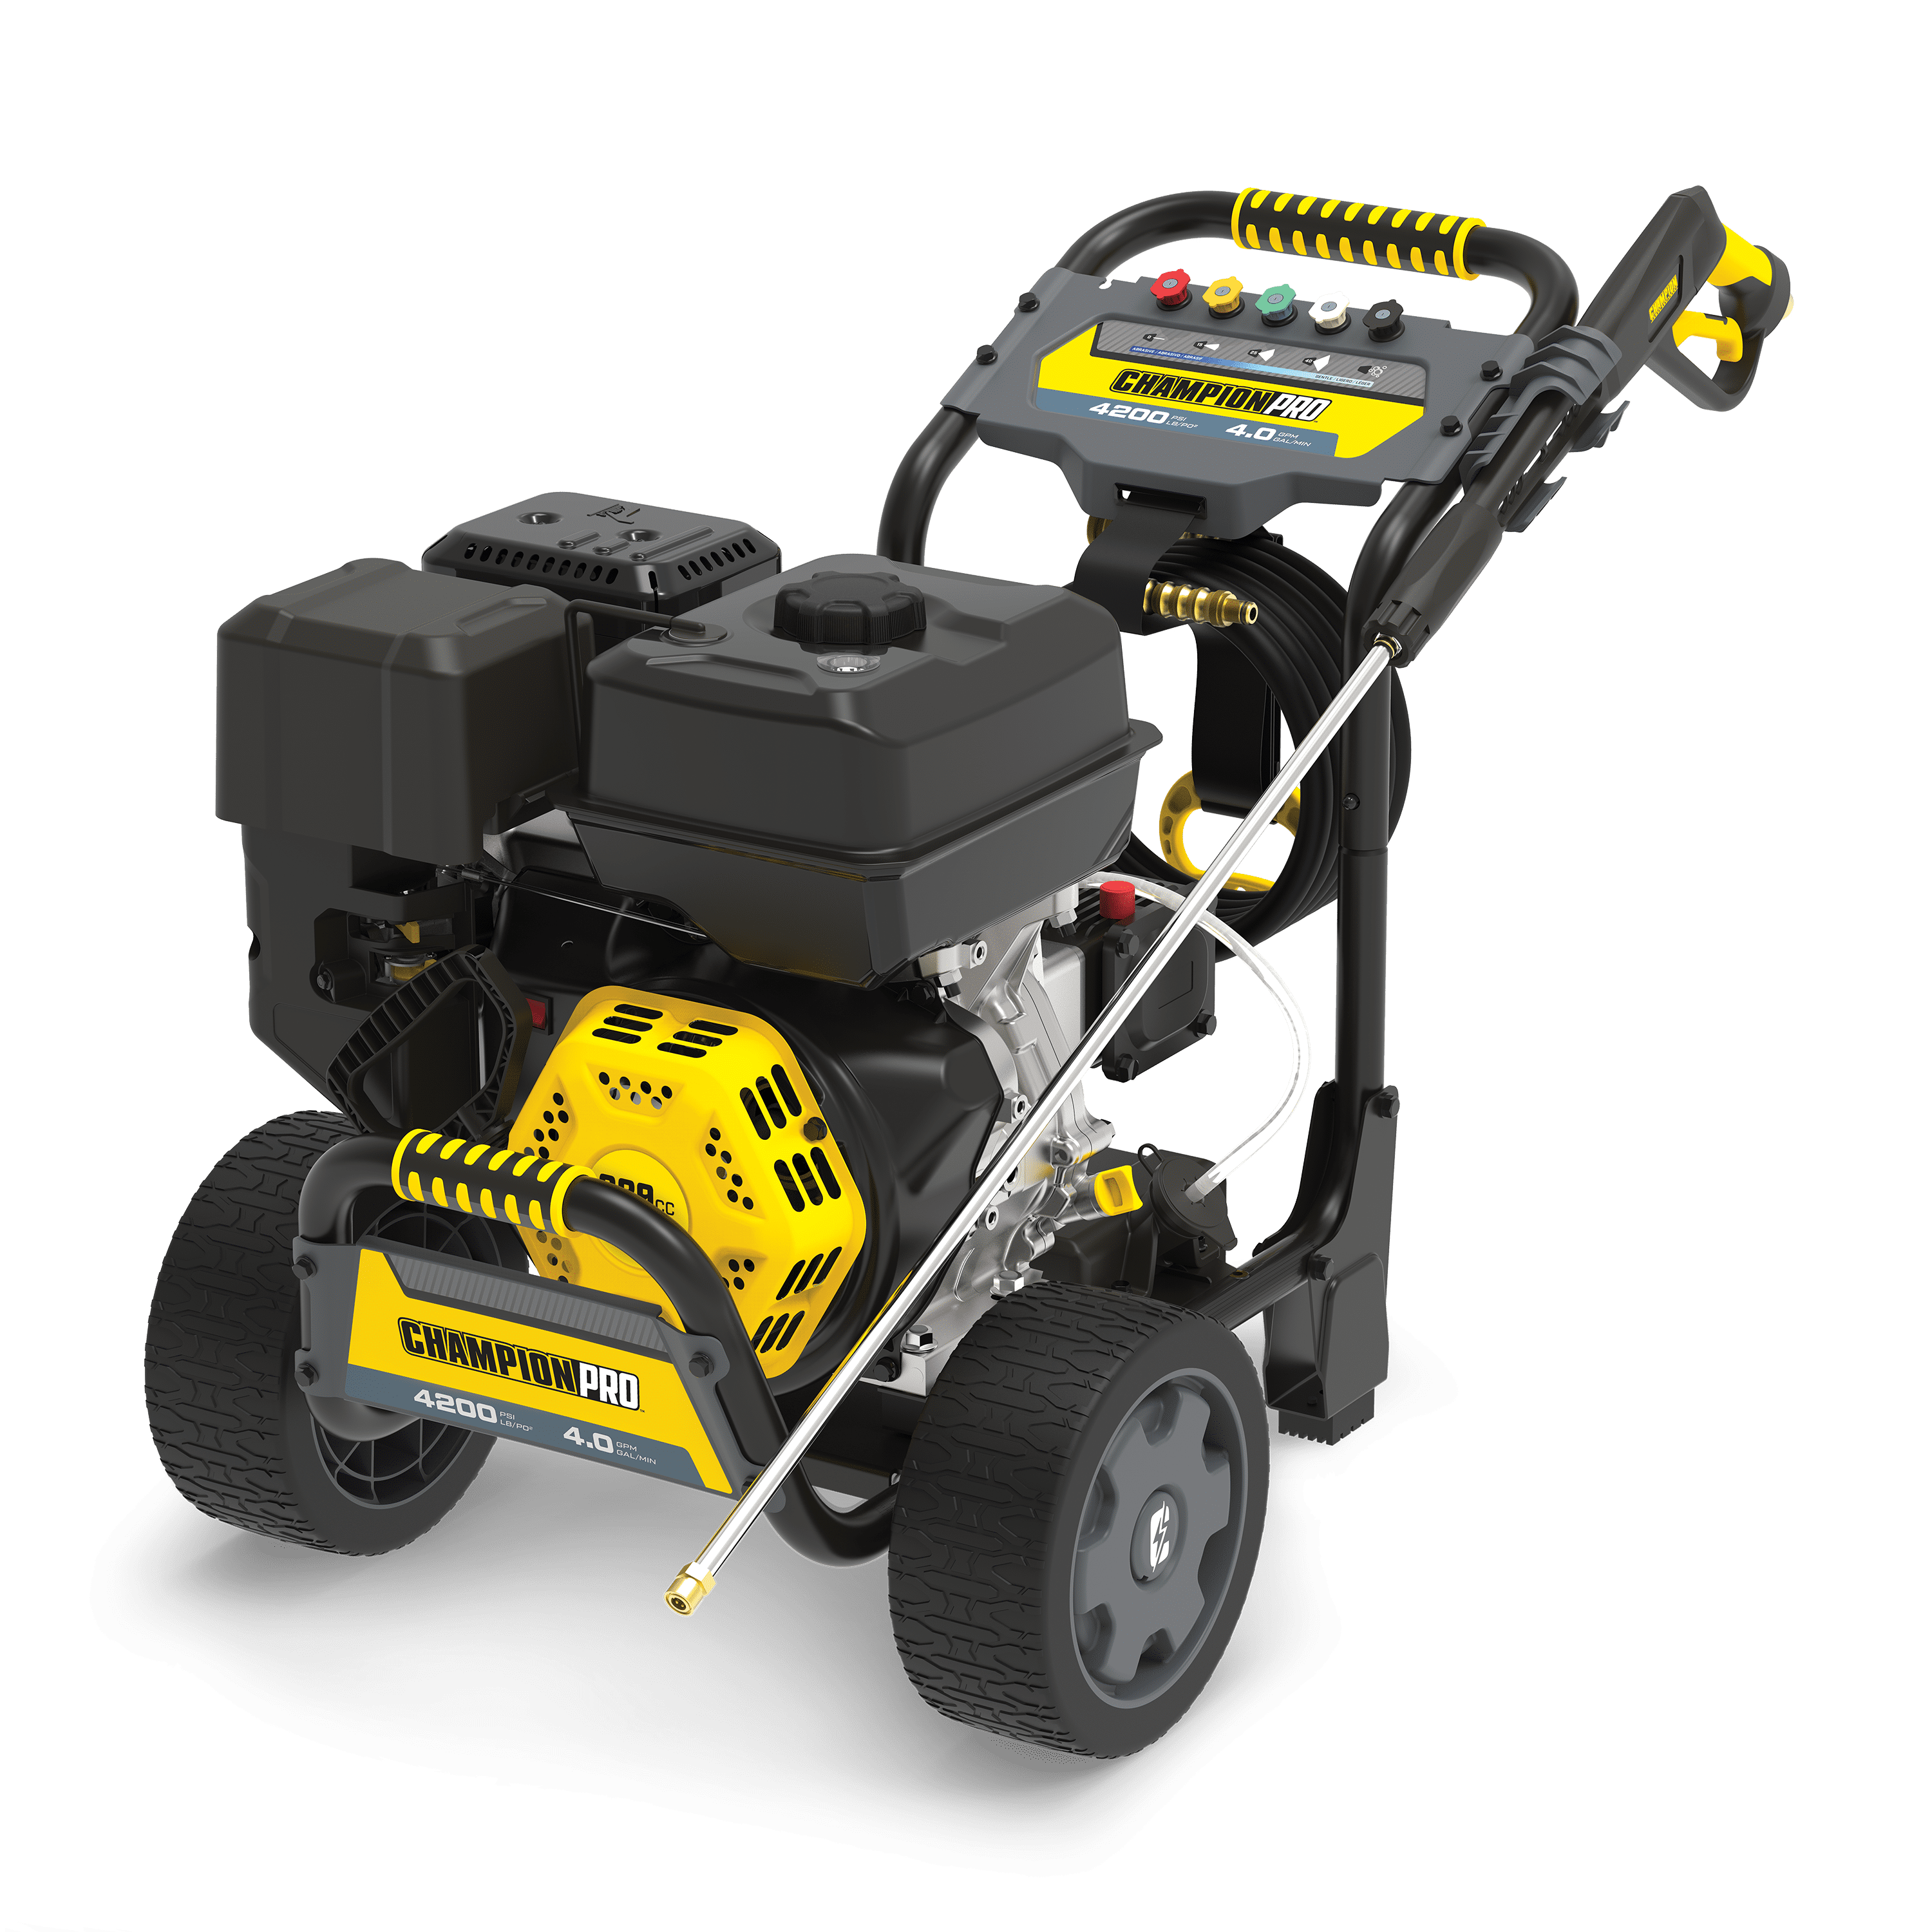 Champion Power Equipment 4200PSI 4.0GPM Commercial Duty Low Profile Gas Pressure Washer